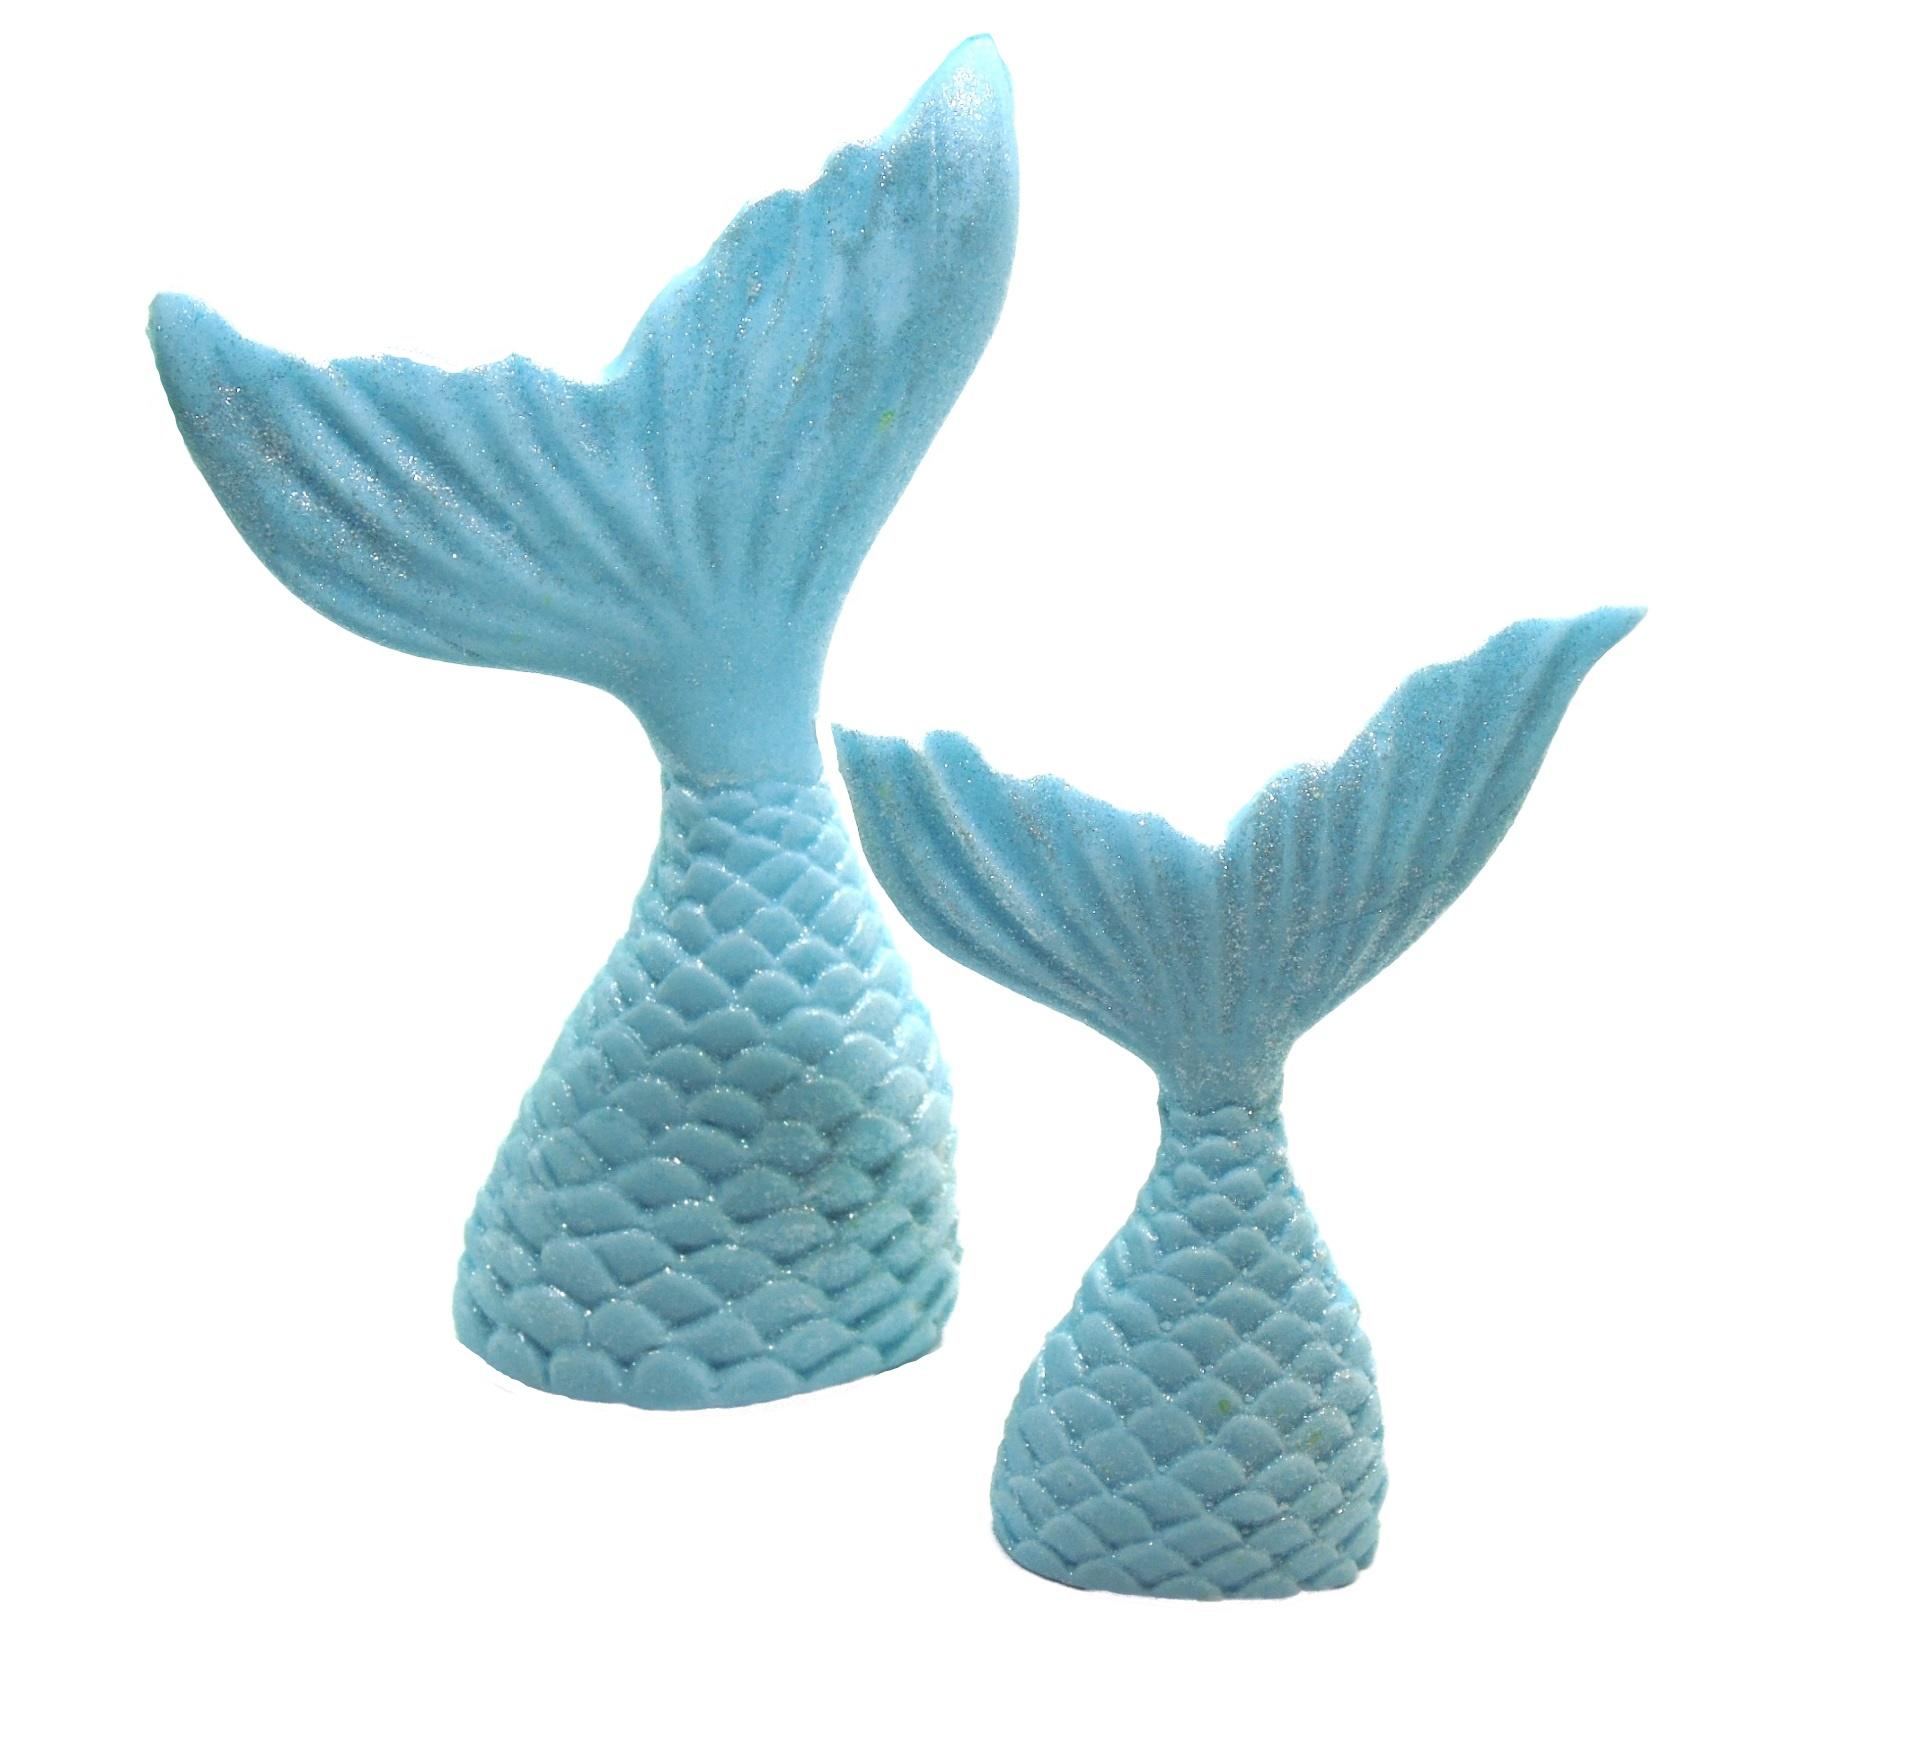 2 Blue Edible Mermaid Tails Large & Small Vegan Birthday Cake Toppers